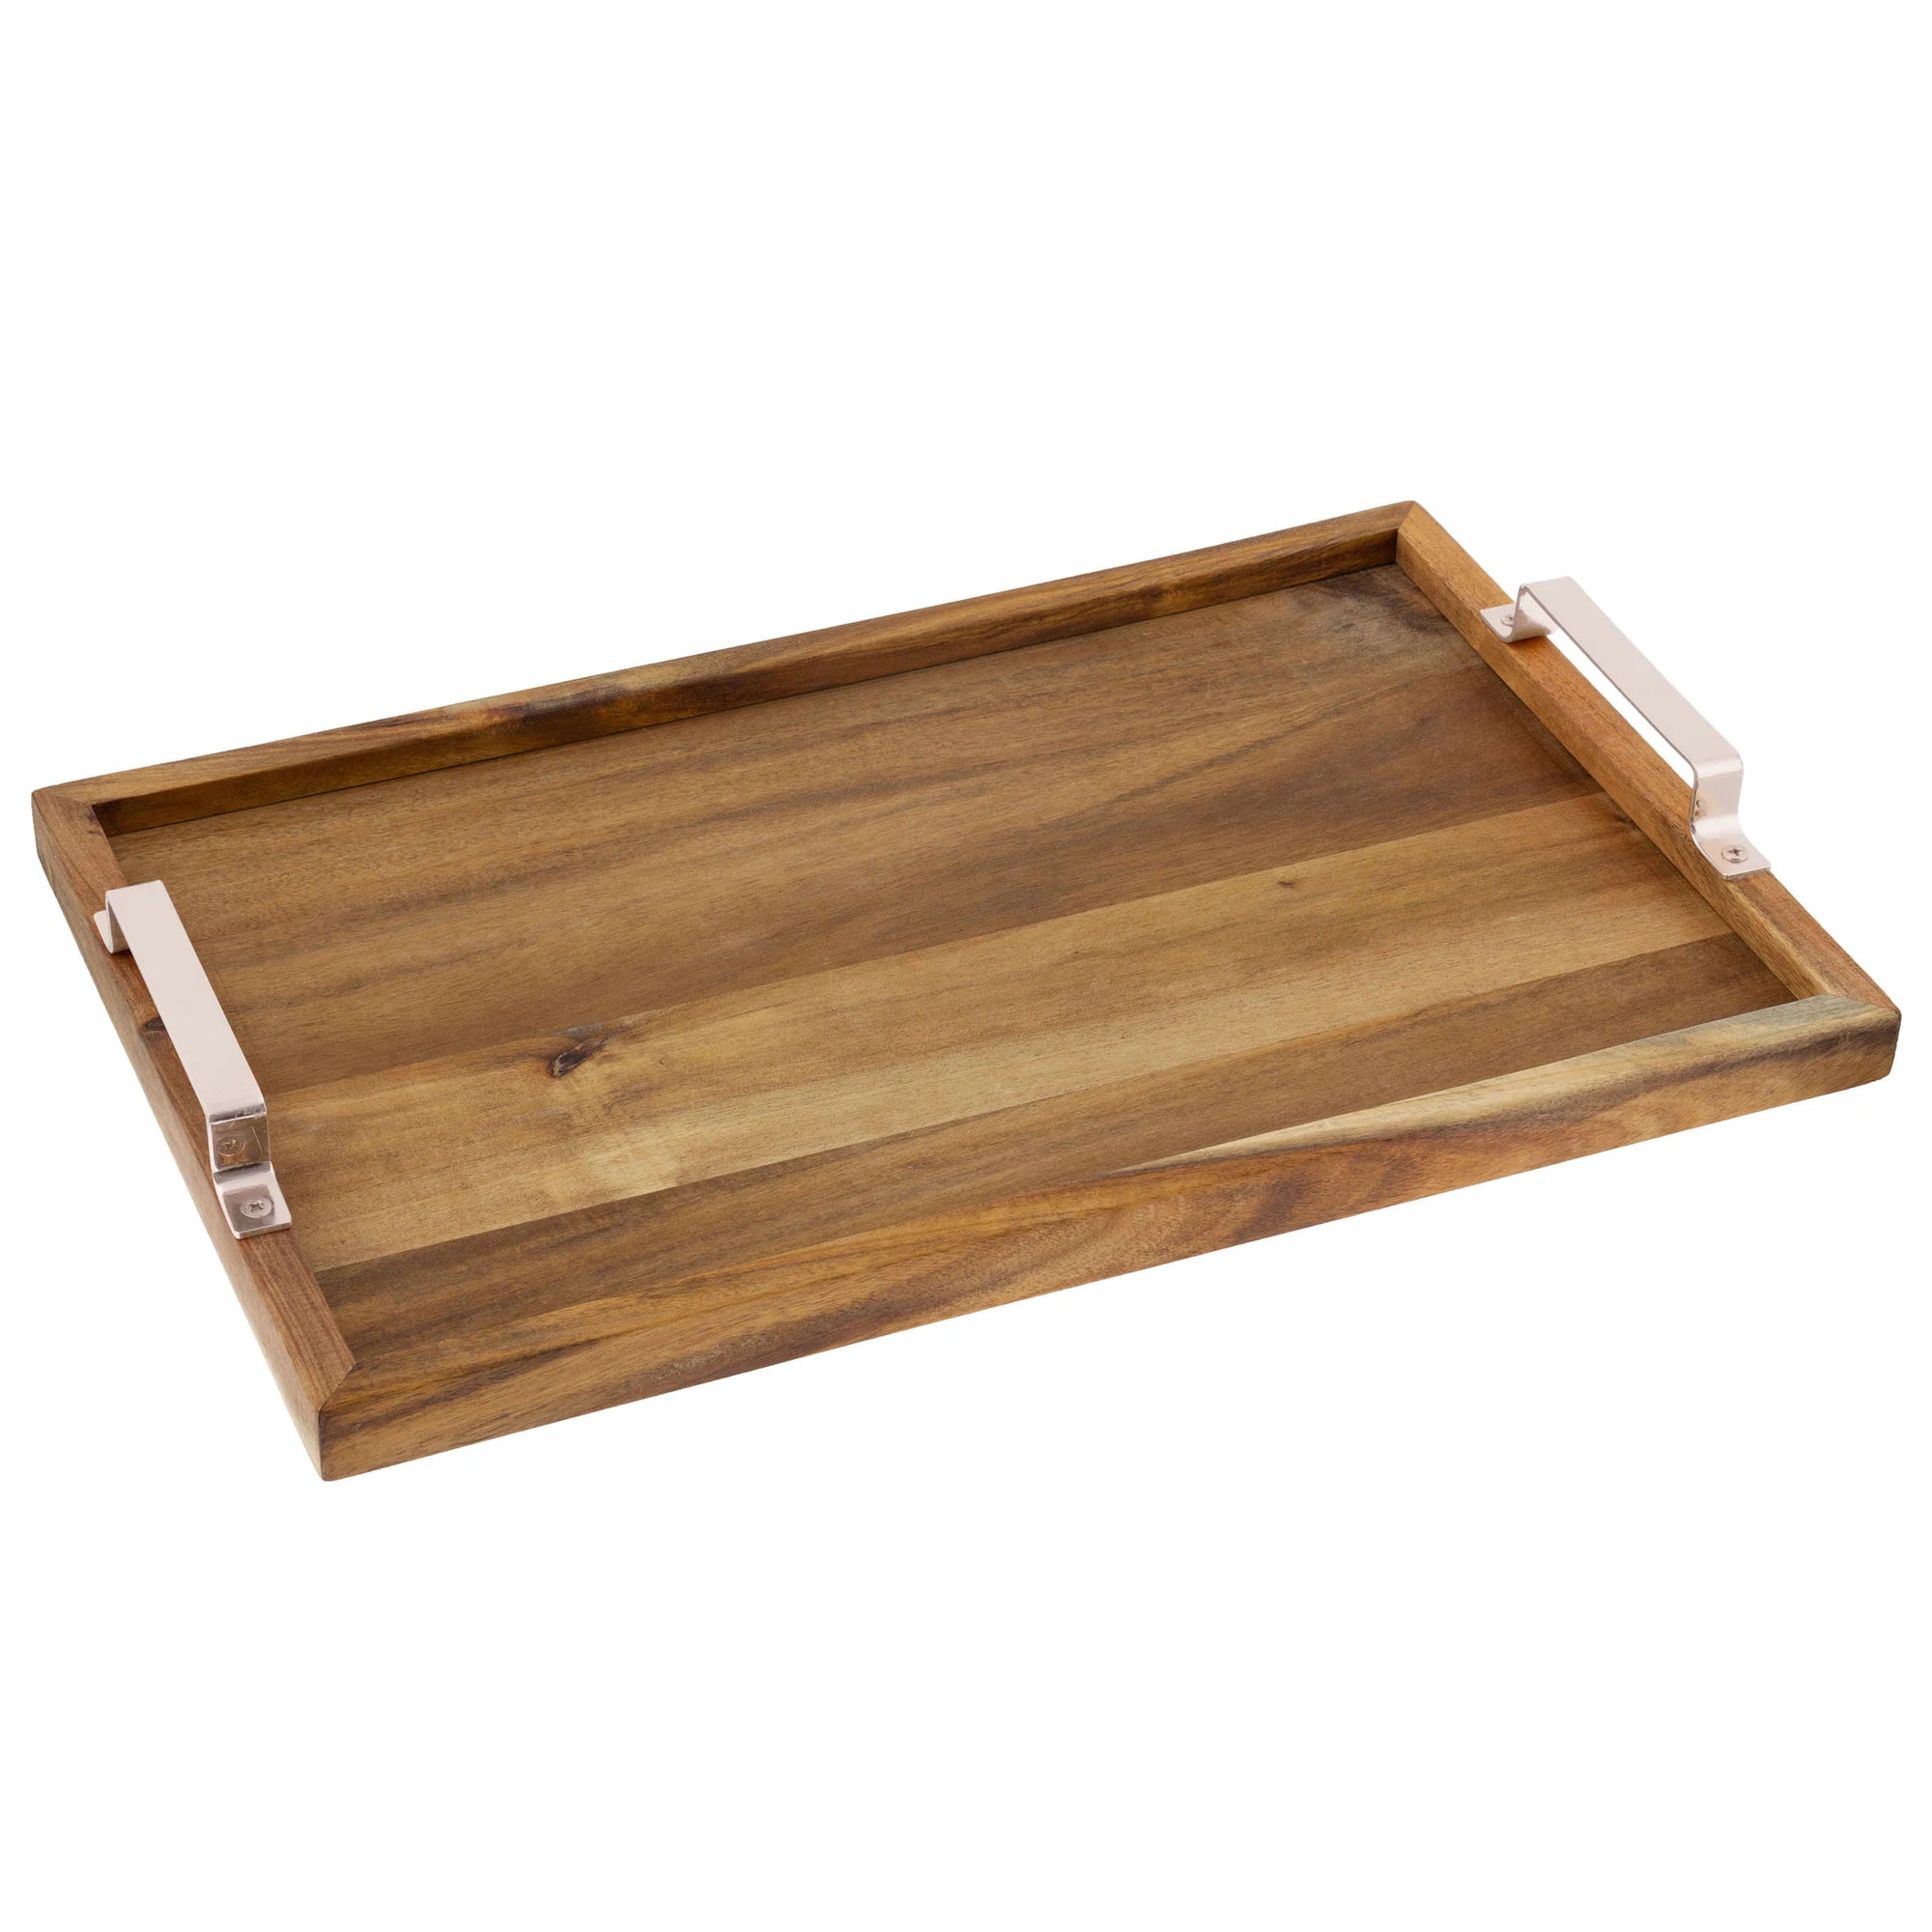 Wooden Tray With Metal Handles - Zinnias Gift Boutique